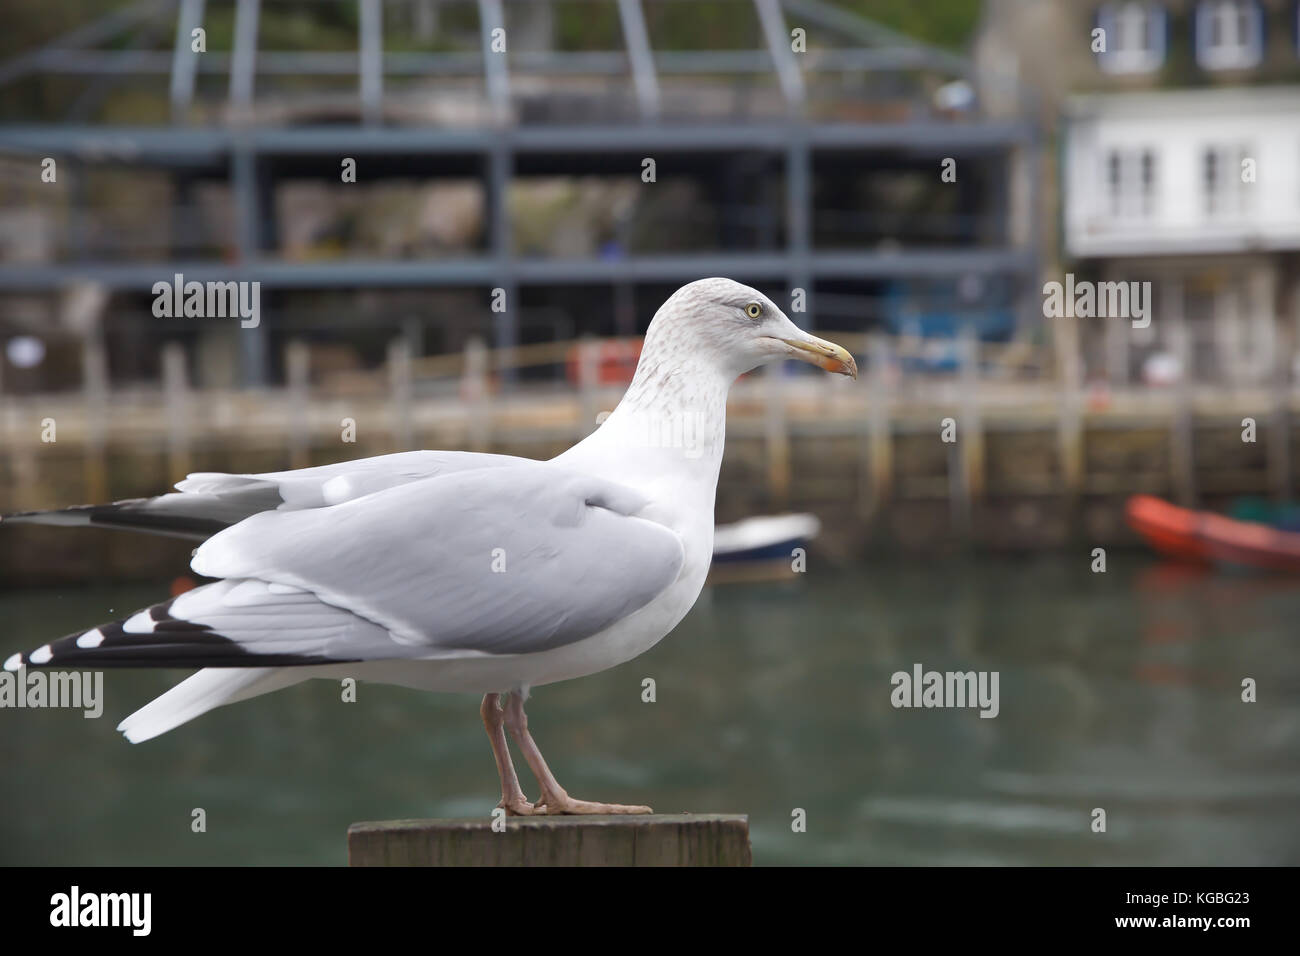 Looe, UK. 6th Nov, 2017. UK Weather. Seagull in Looe, Cornwall Credit: Keith Larby/Alamy Live News Stock Photo